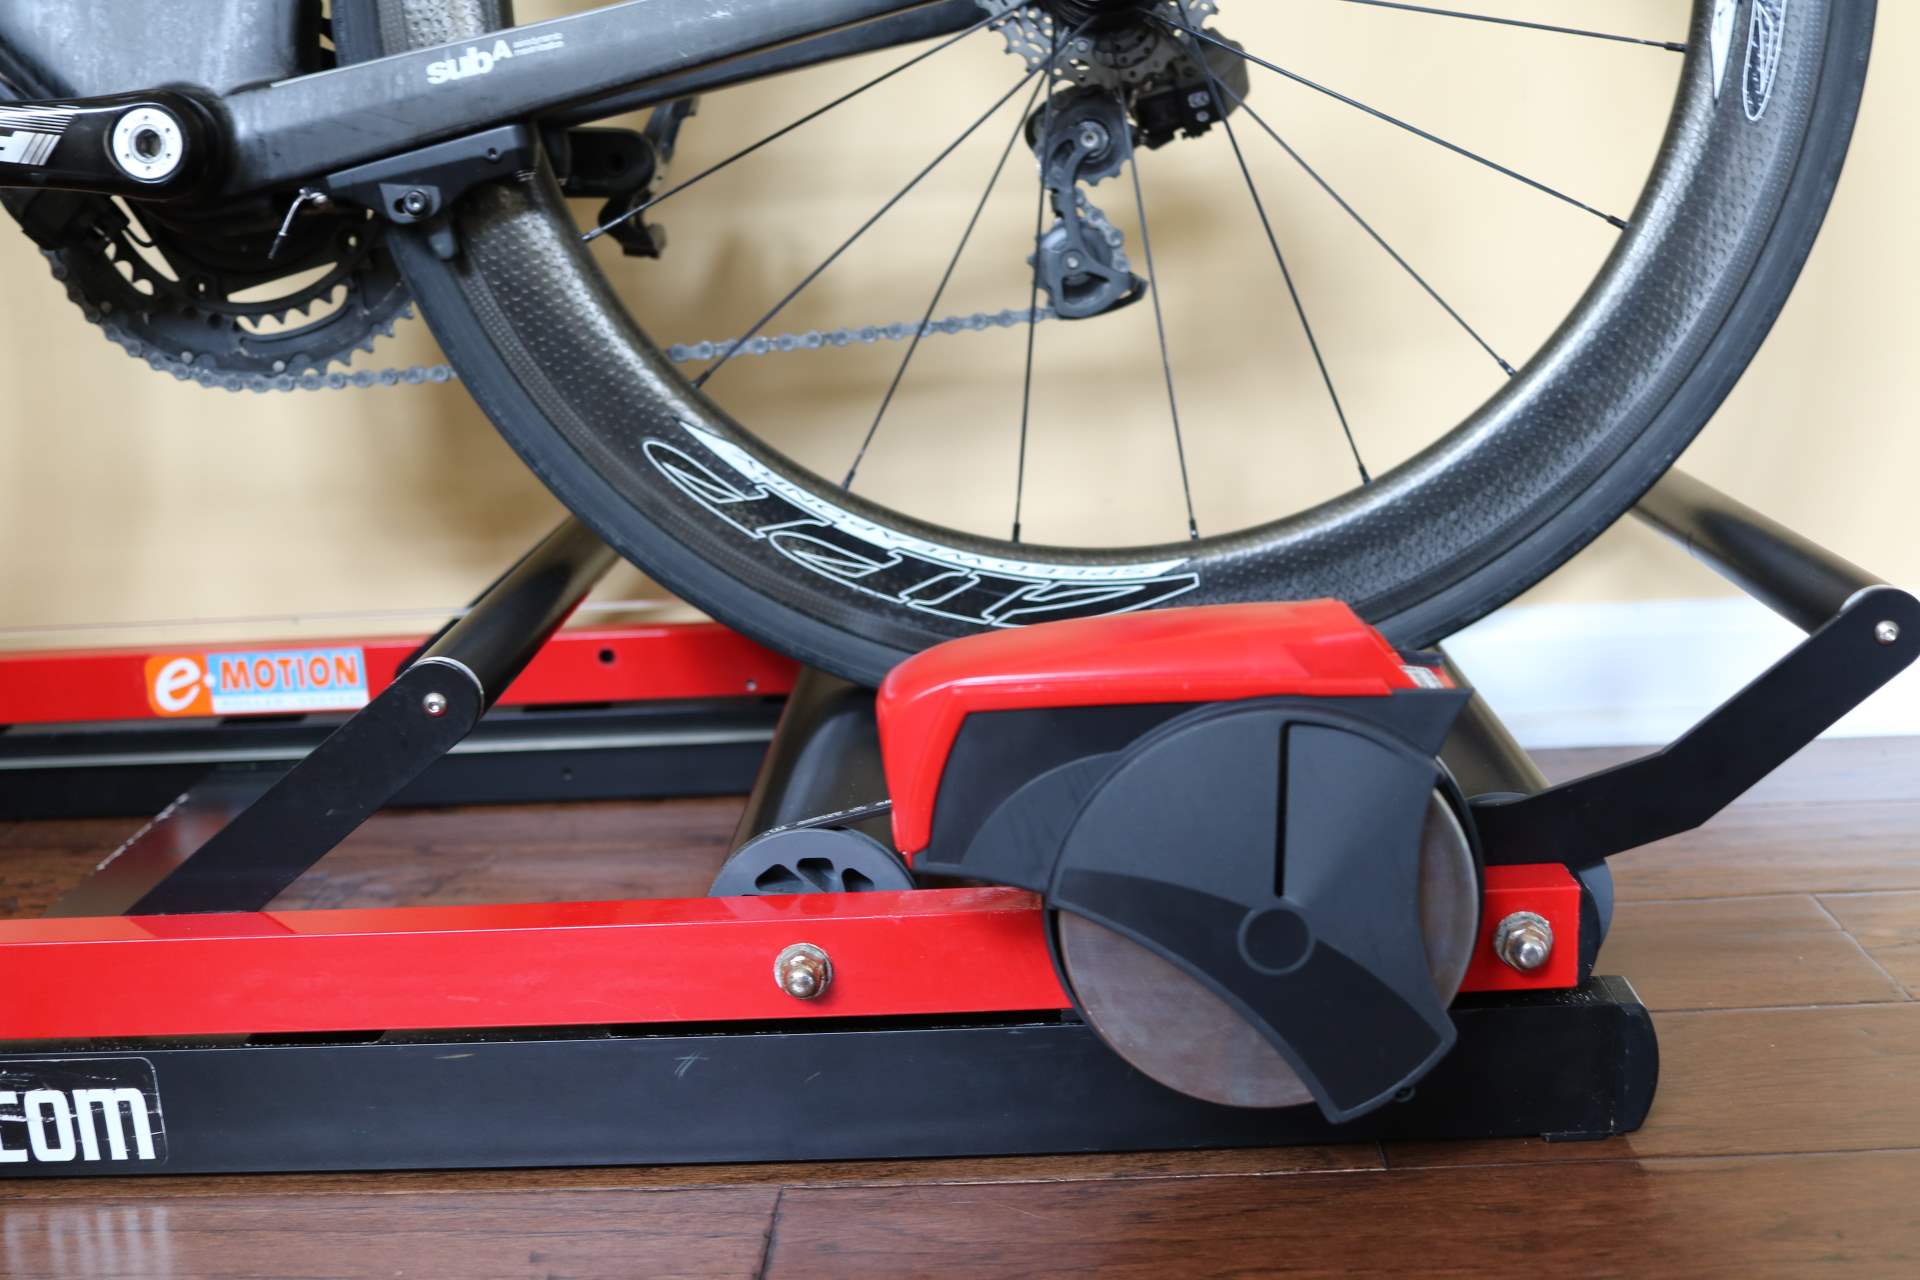 smart trainer rollers